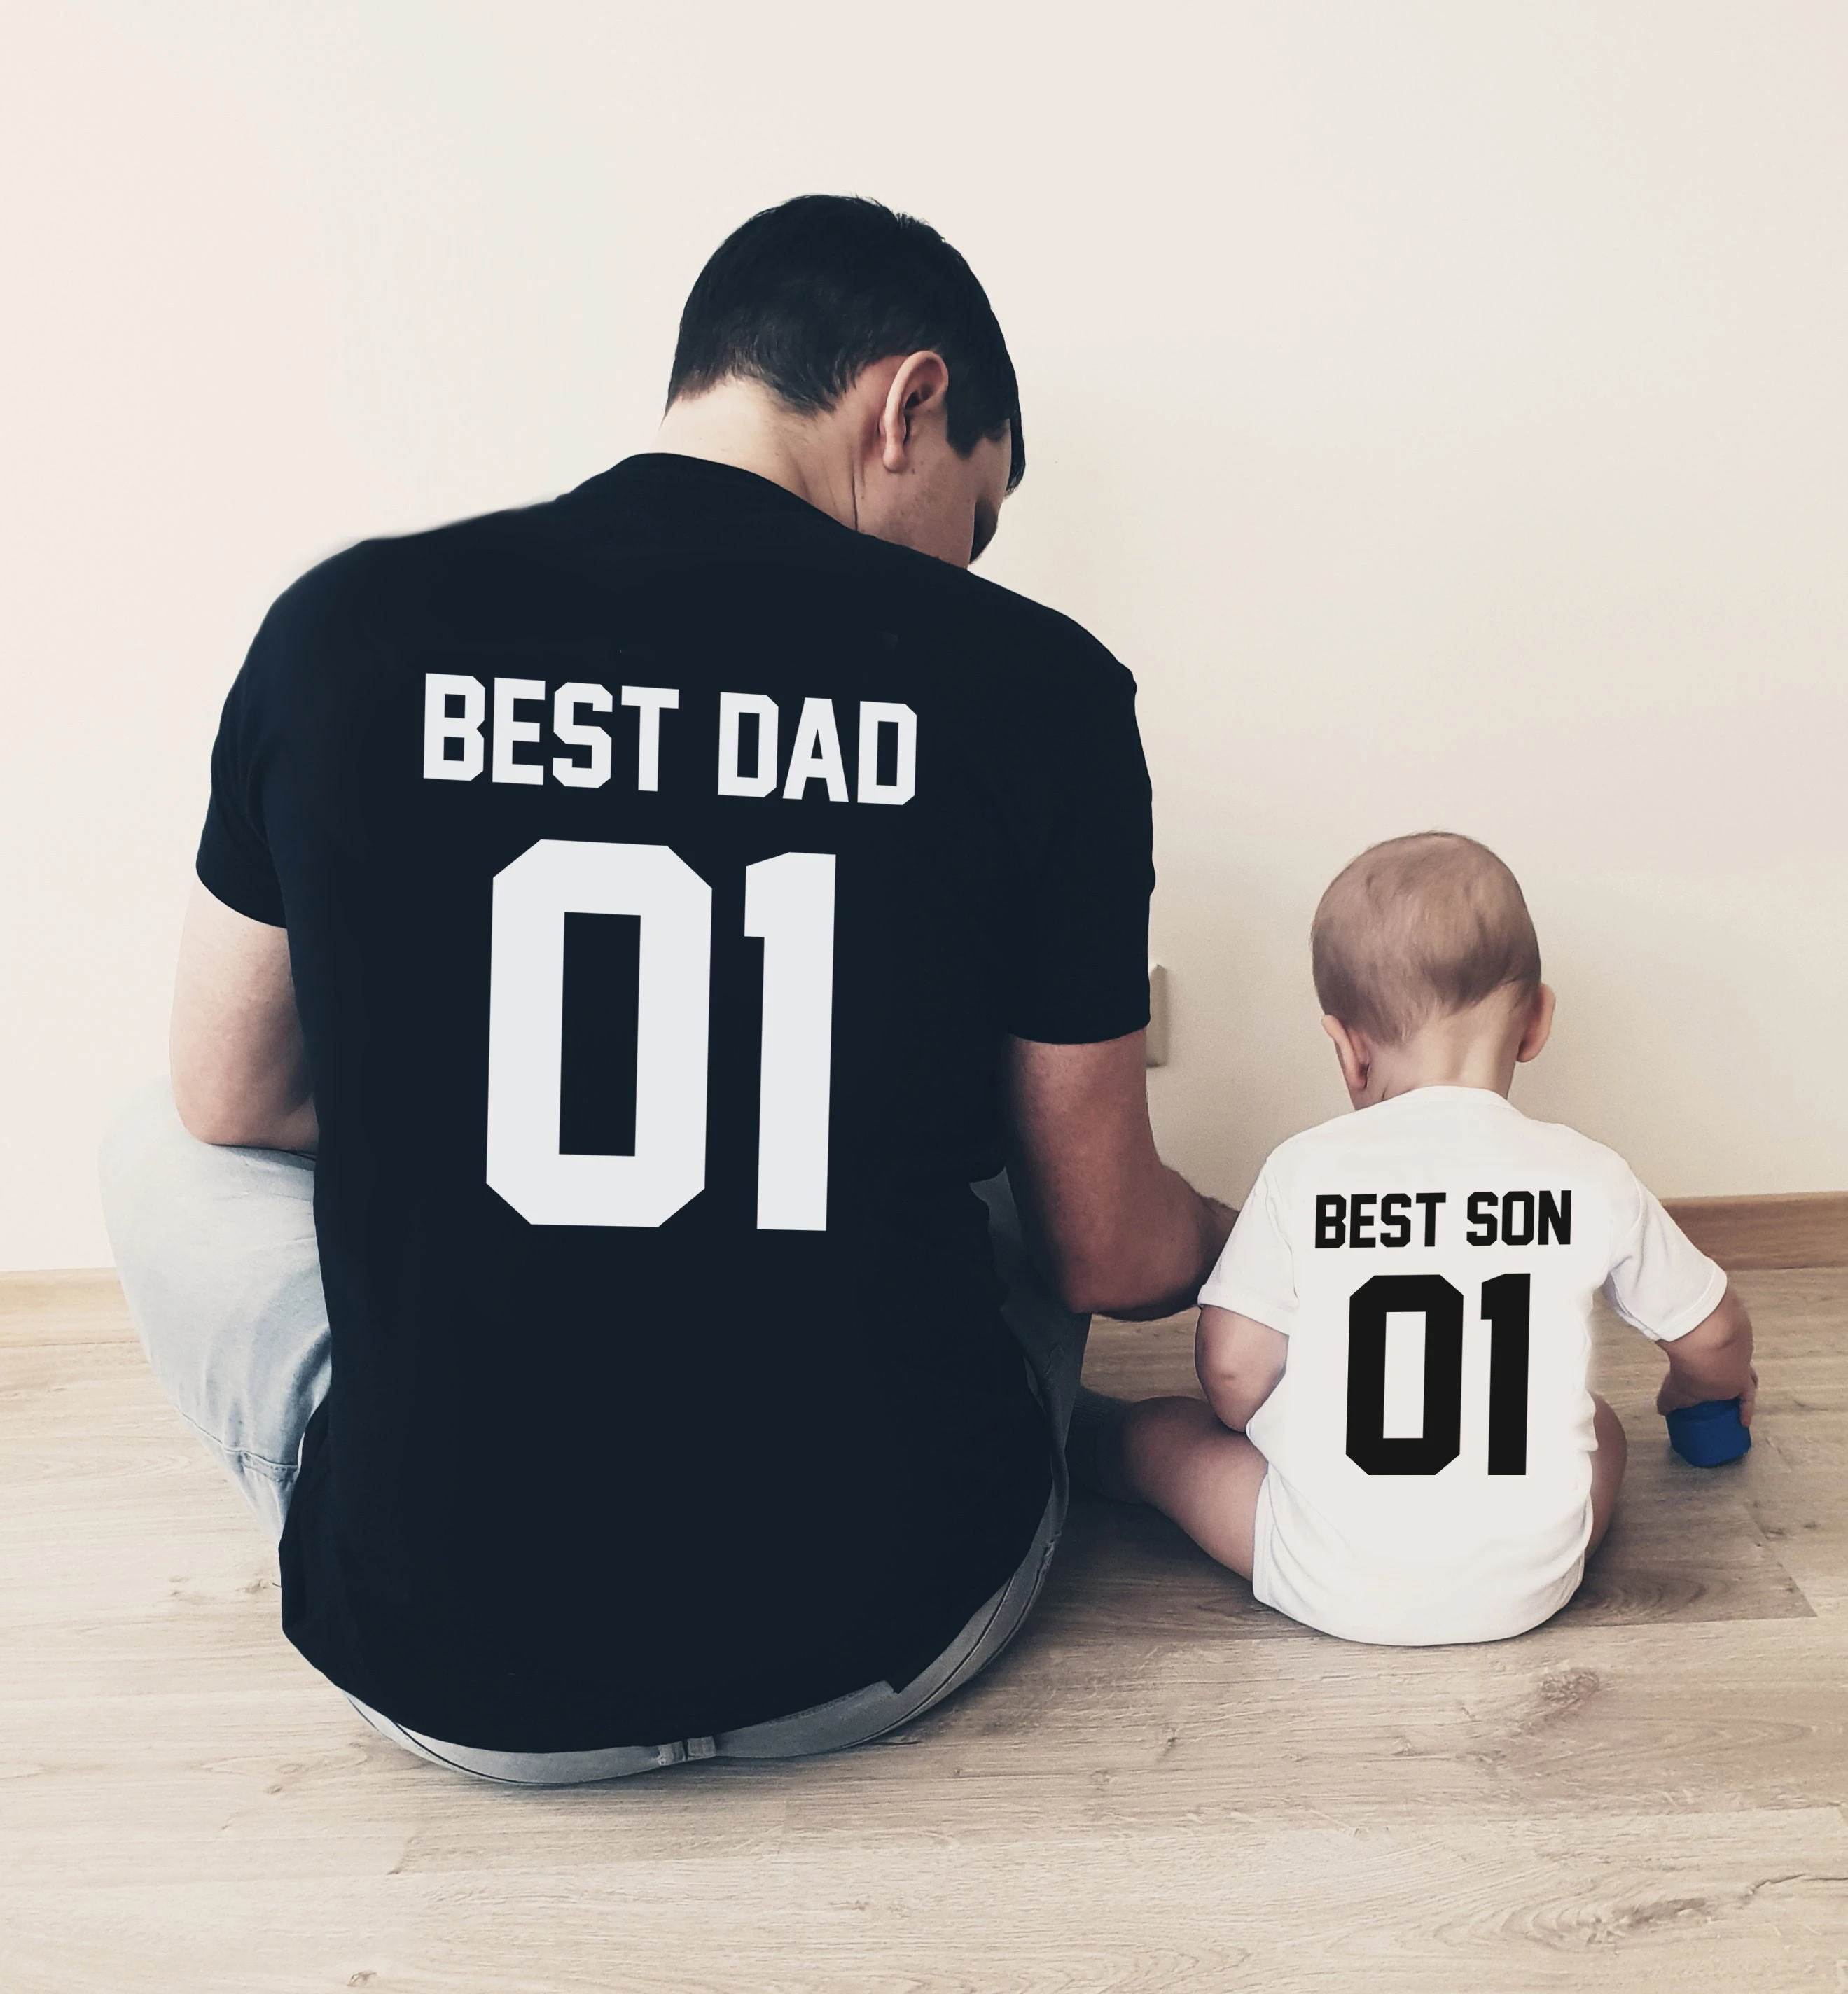 Best Dad Best Son Shirts Dad and Son Matching T-Shirts Father and Son Ropa Baby Romper Matching Family Shirts Drop Ship